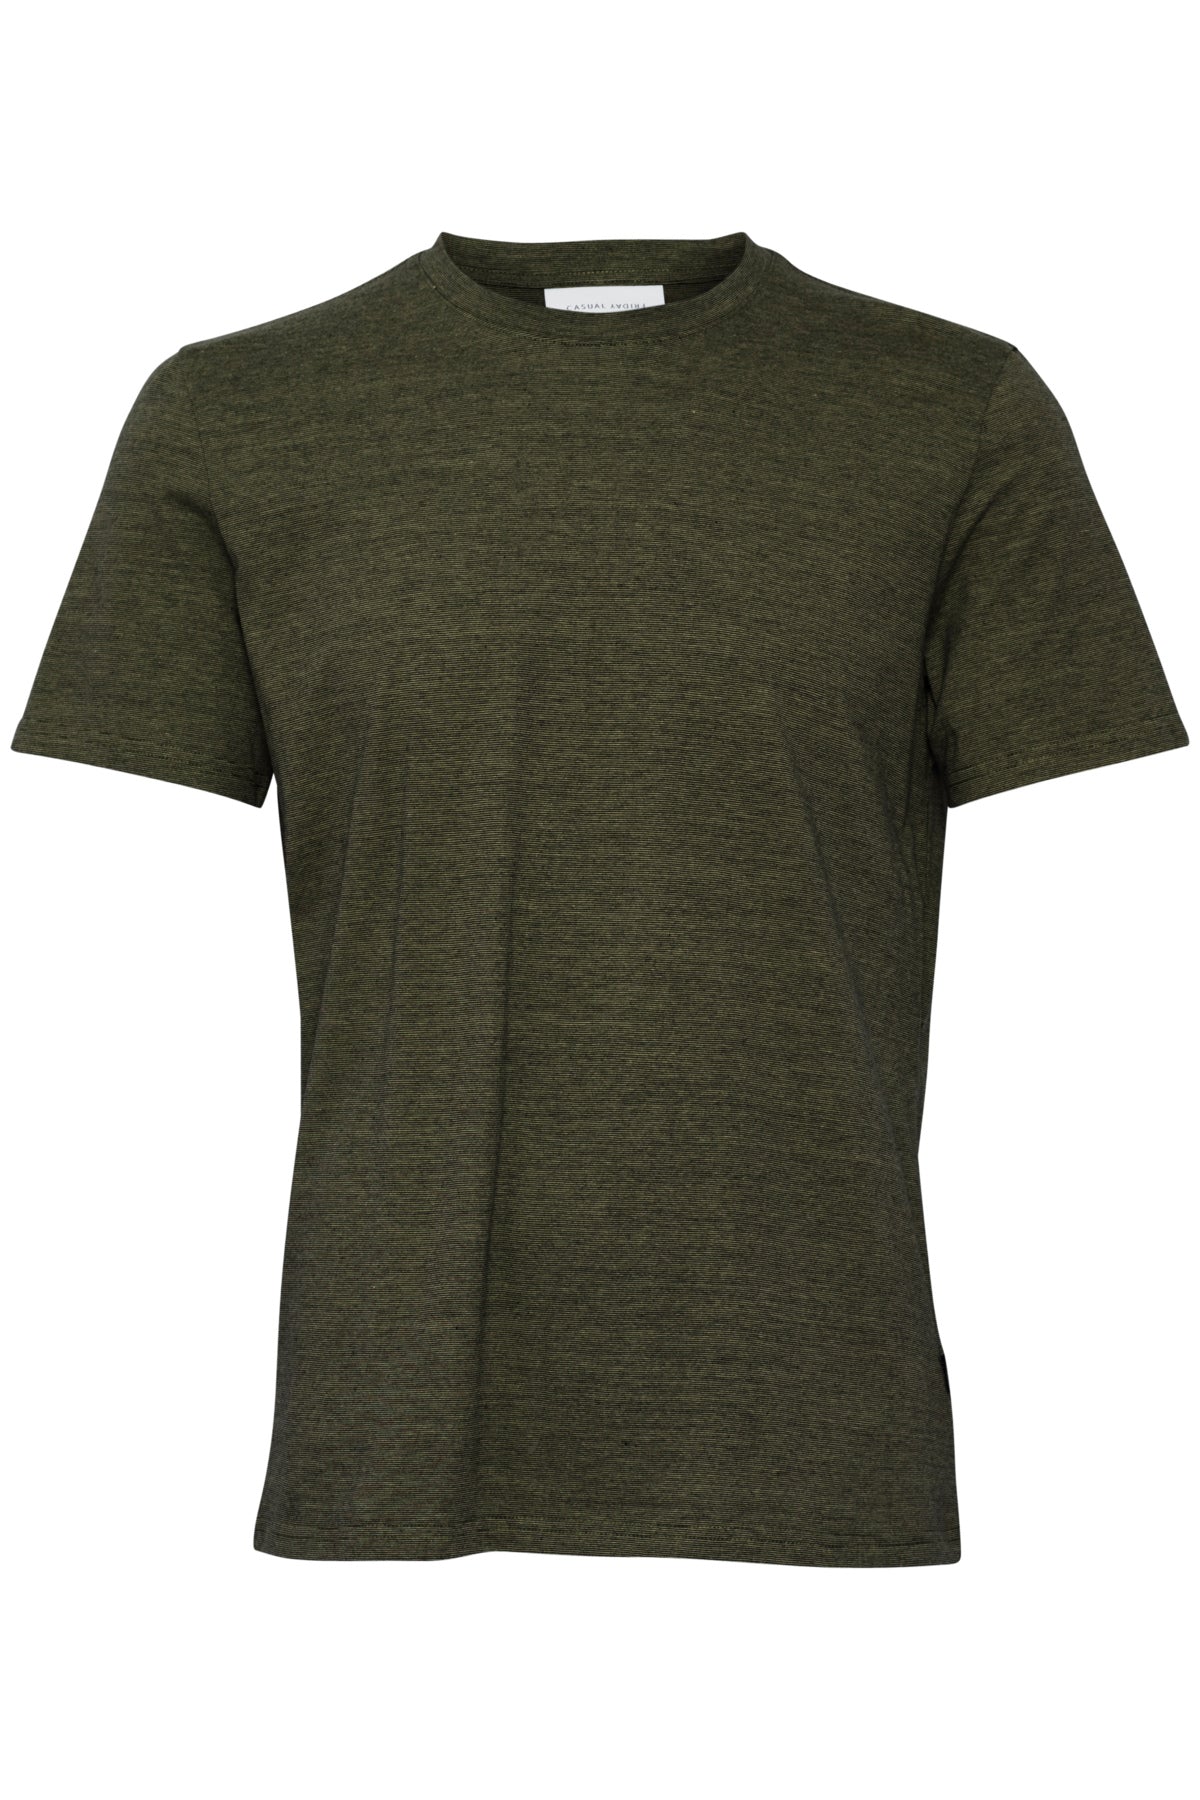 Thor Micro Striped Tee - Cypress - The Sons online